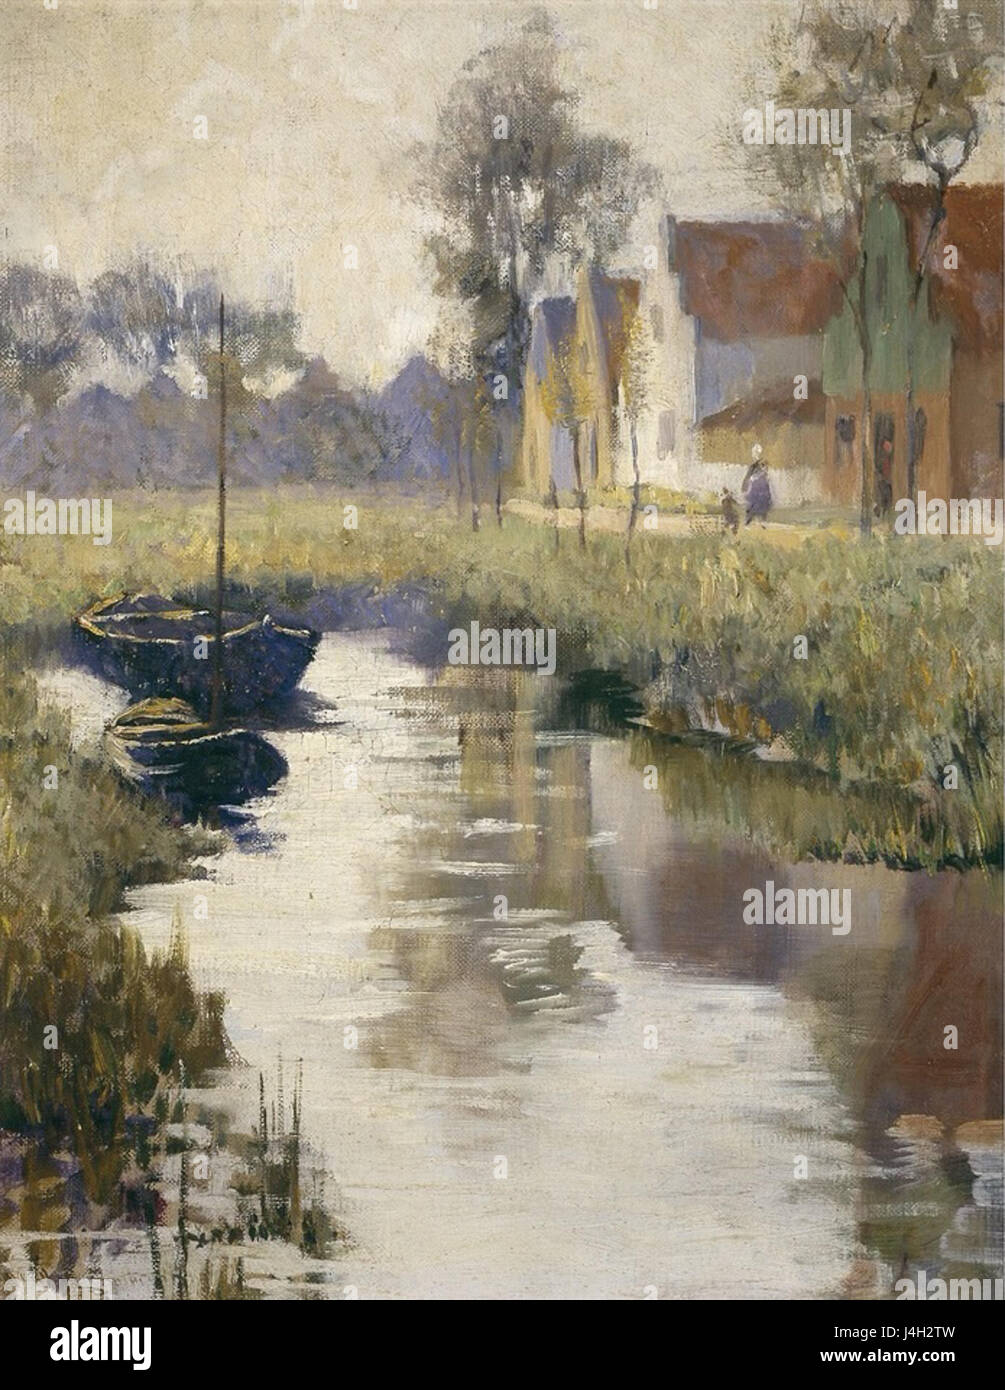 Stanley, Houses by a canal, Rijsoord Stock Photo